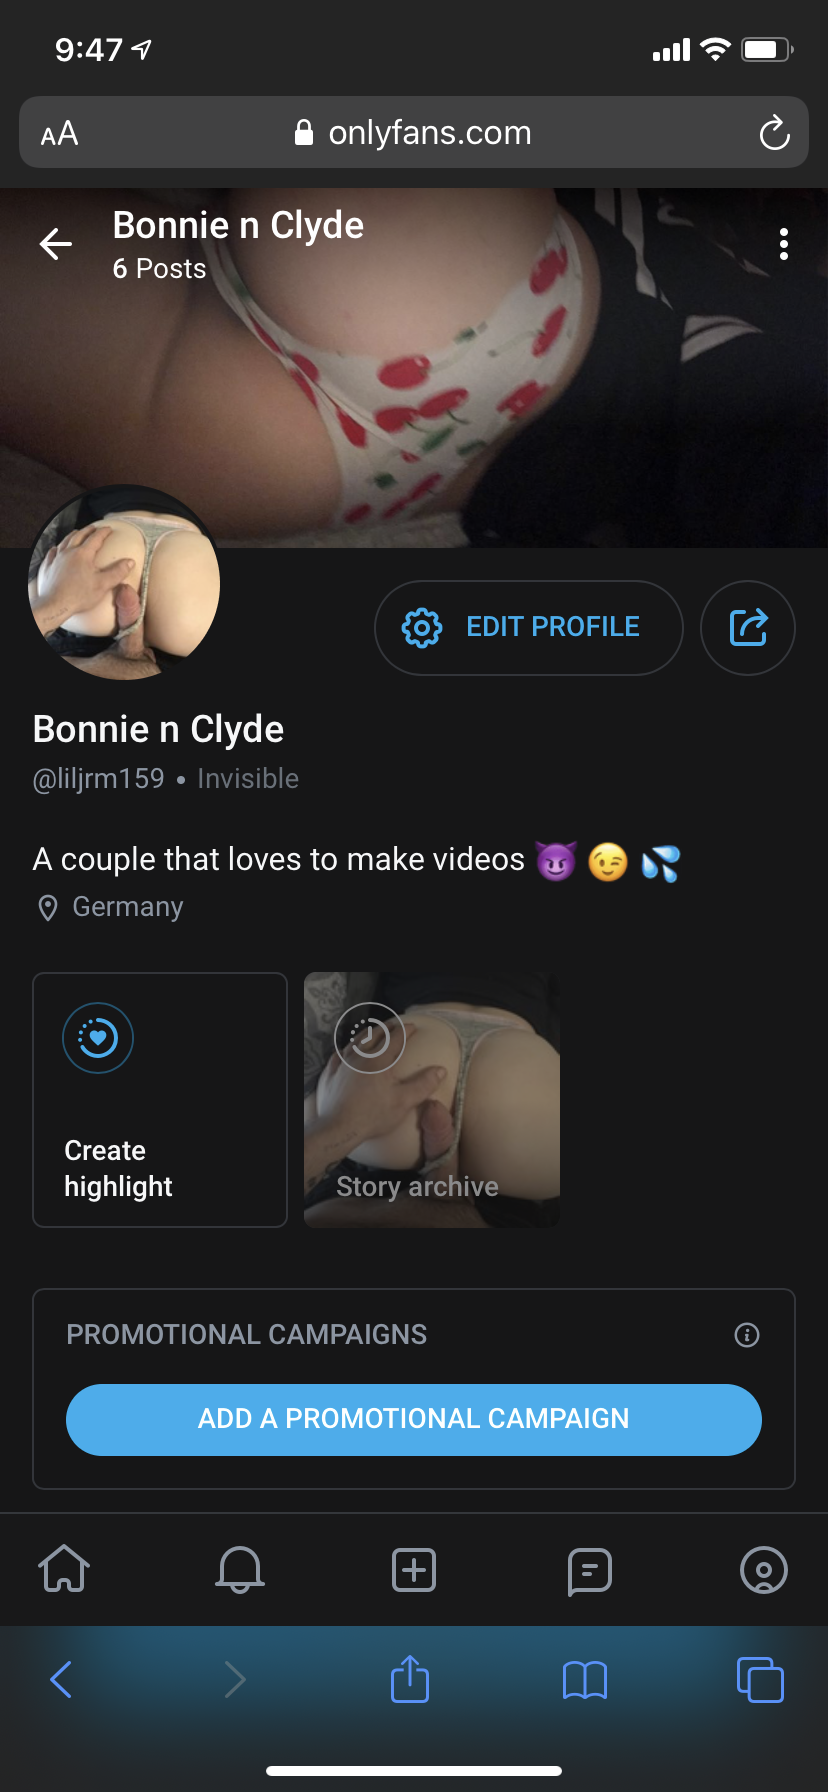 Watch the Photo by Bonnie n clyde with the username @liljman58, posted on August 27, 2020. The post is about the topic Looking Up.